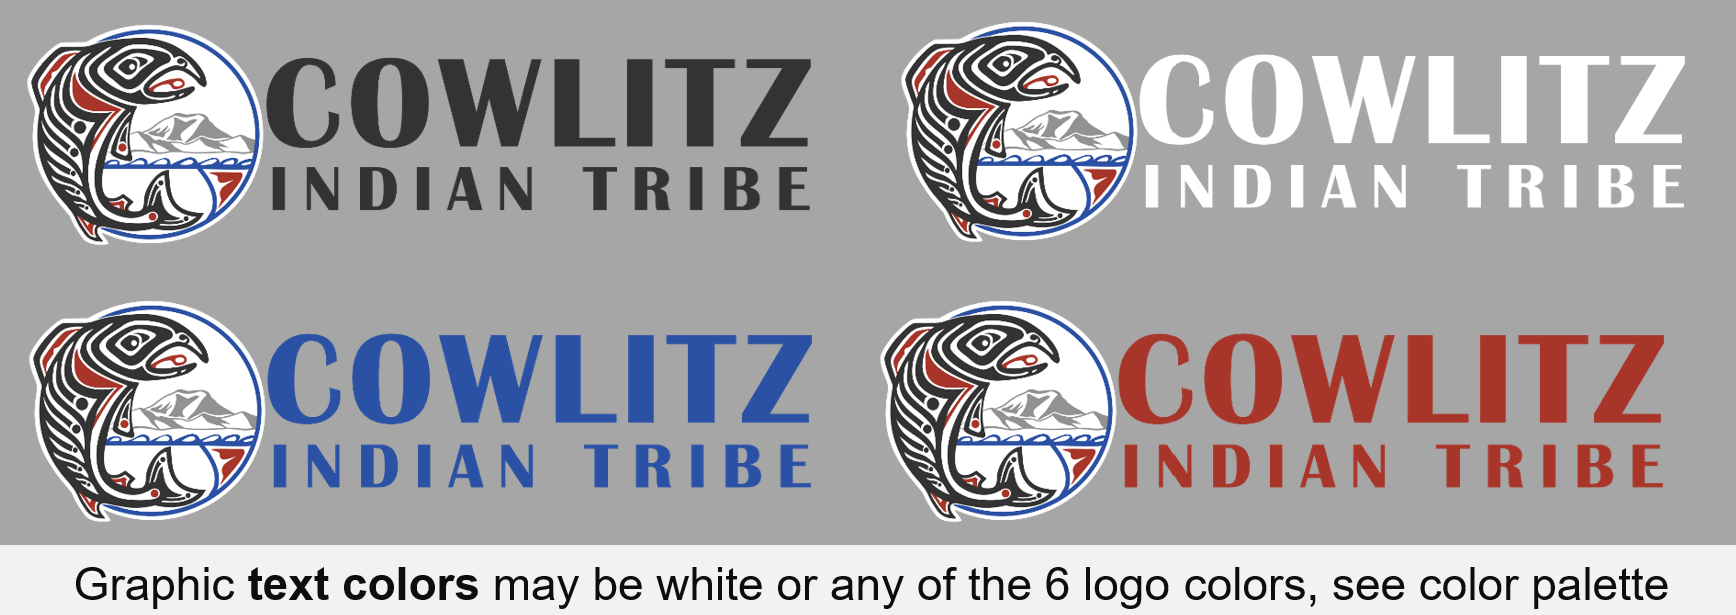 Images of Cowlitz Tribe Logo with side text: Cowlitz Indian Tribe